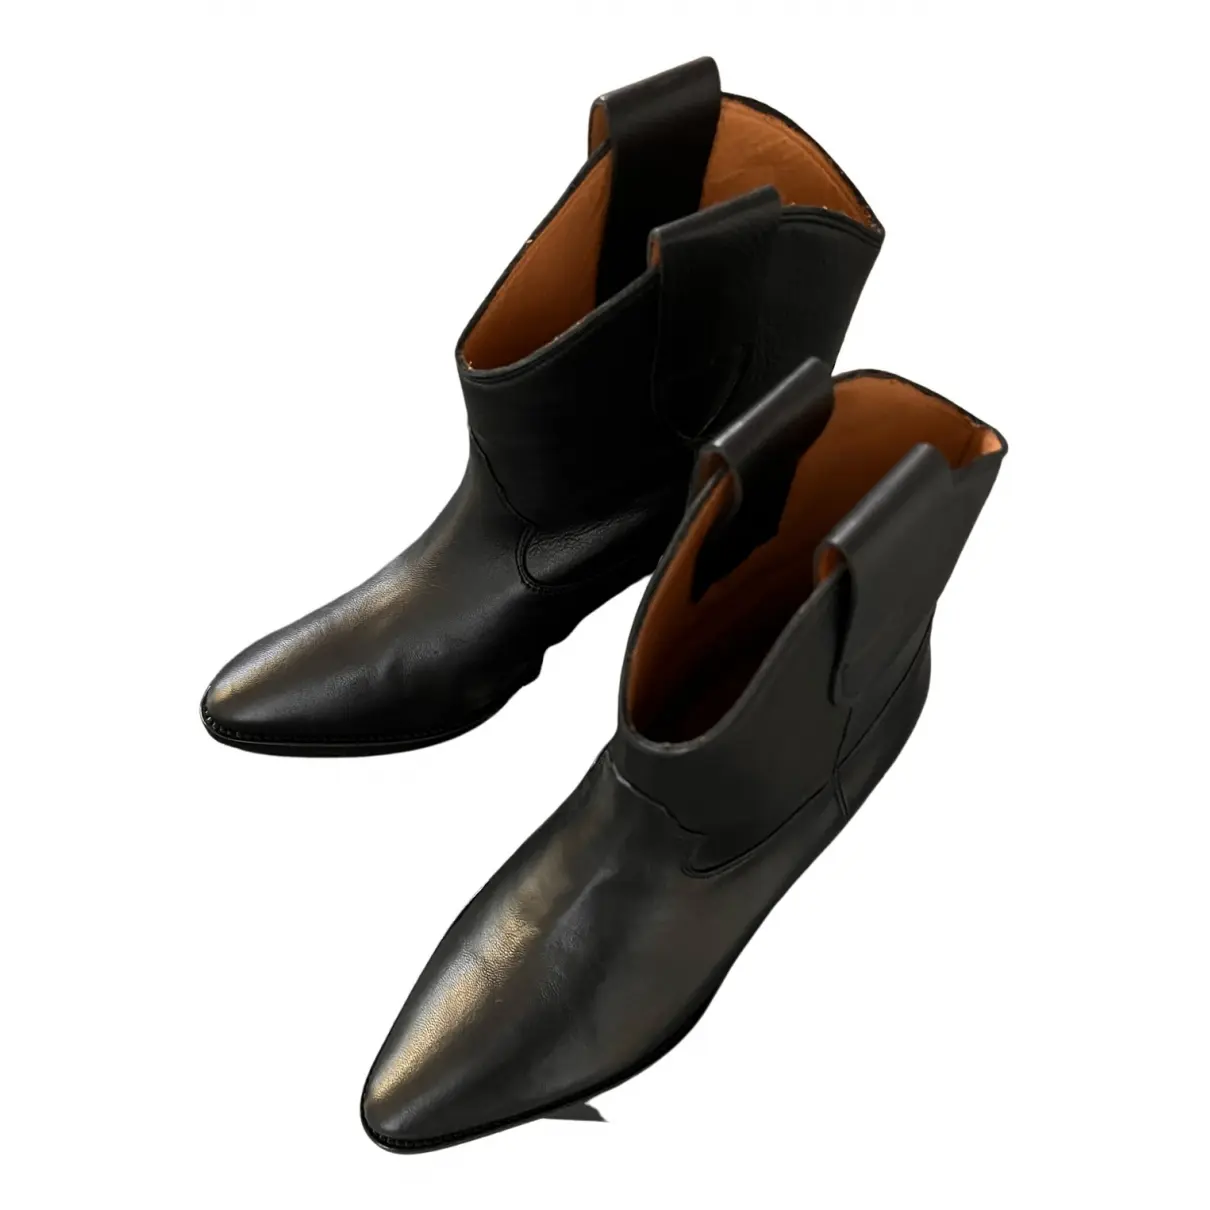 Leather ankle boots Jerome Dreyfuss